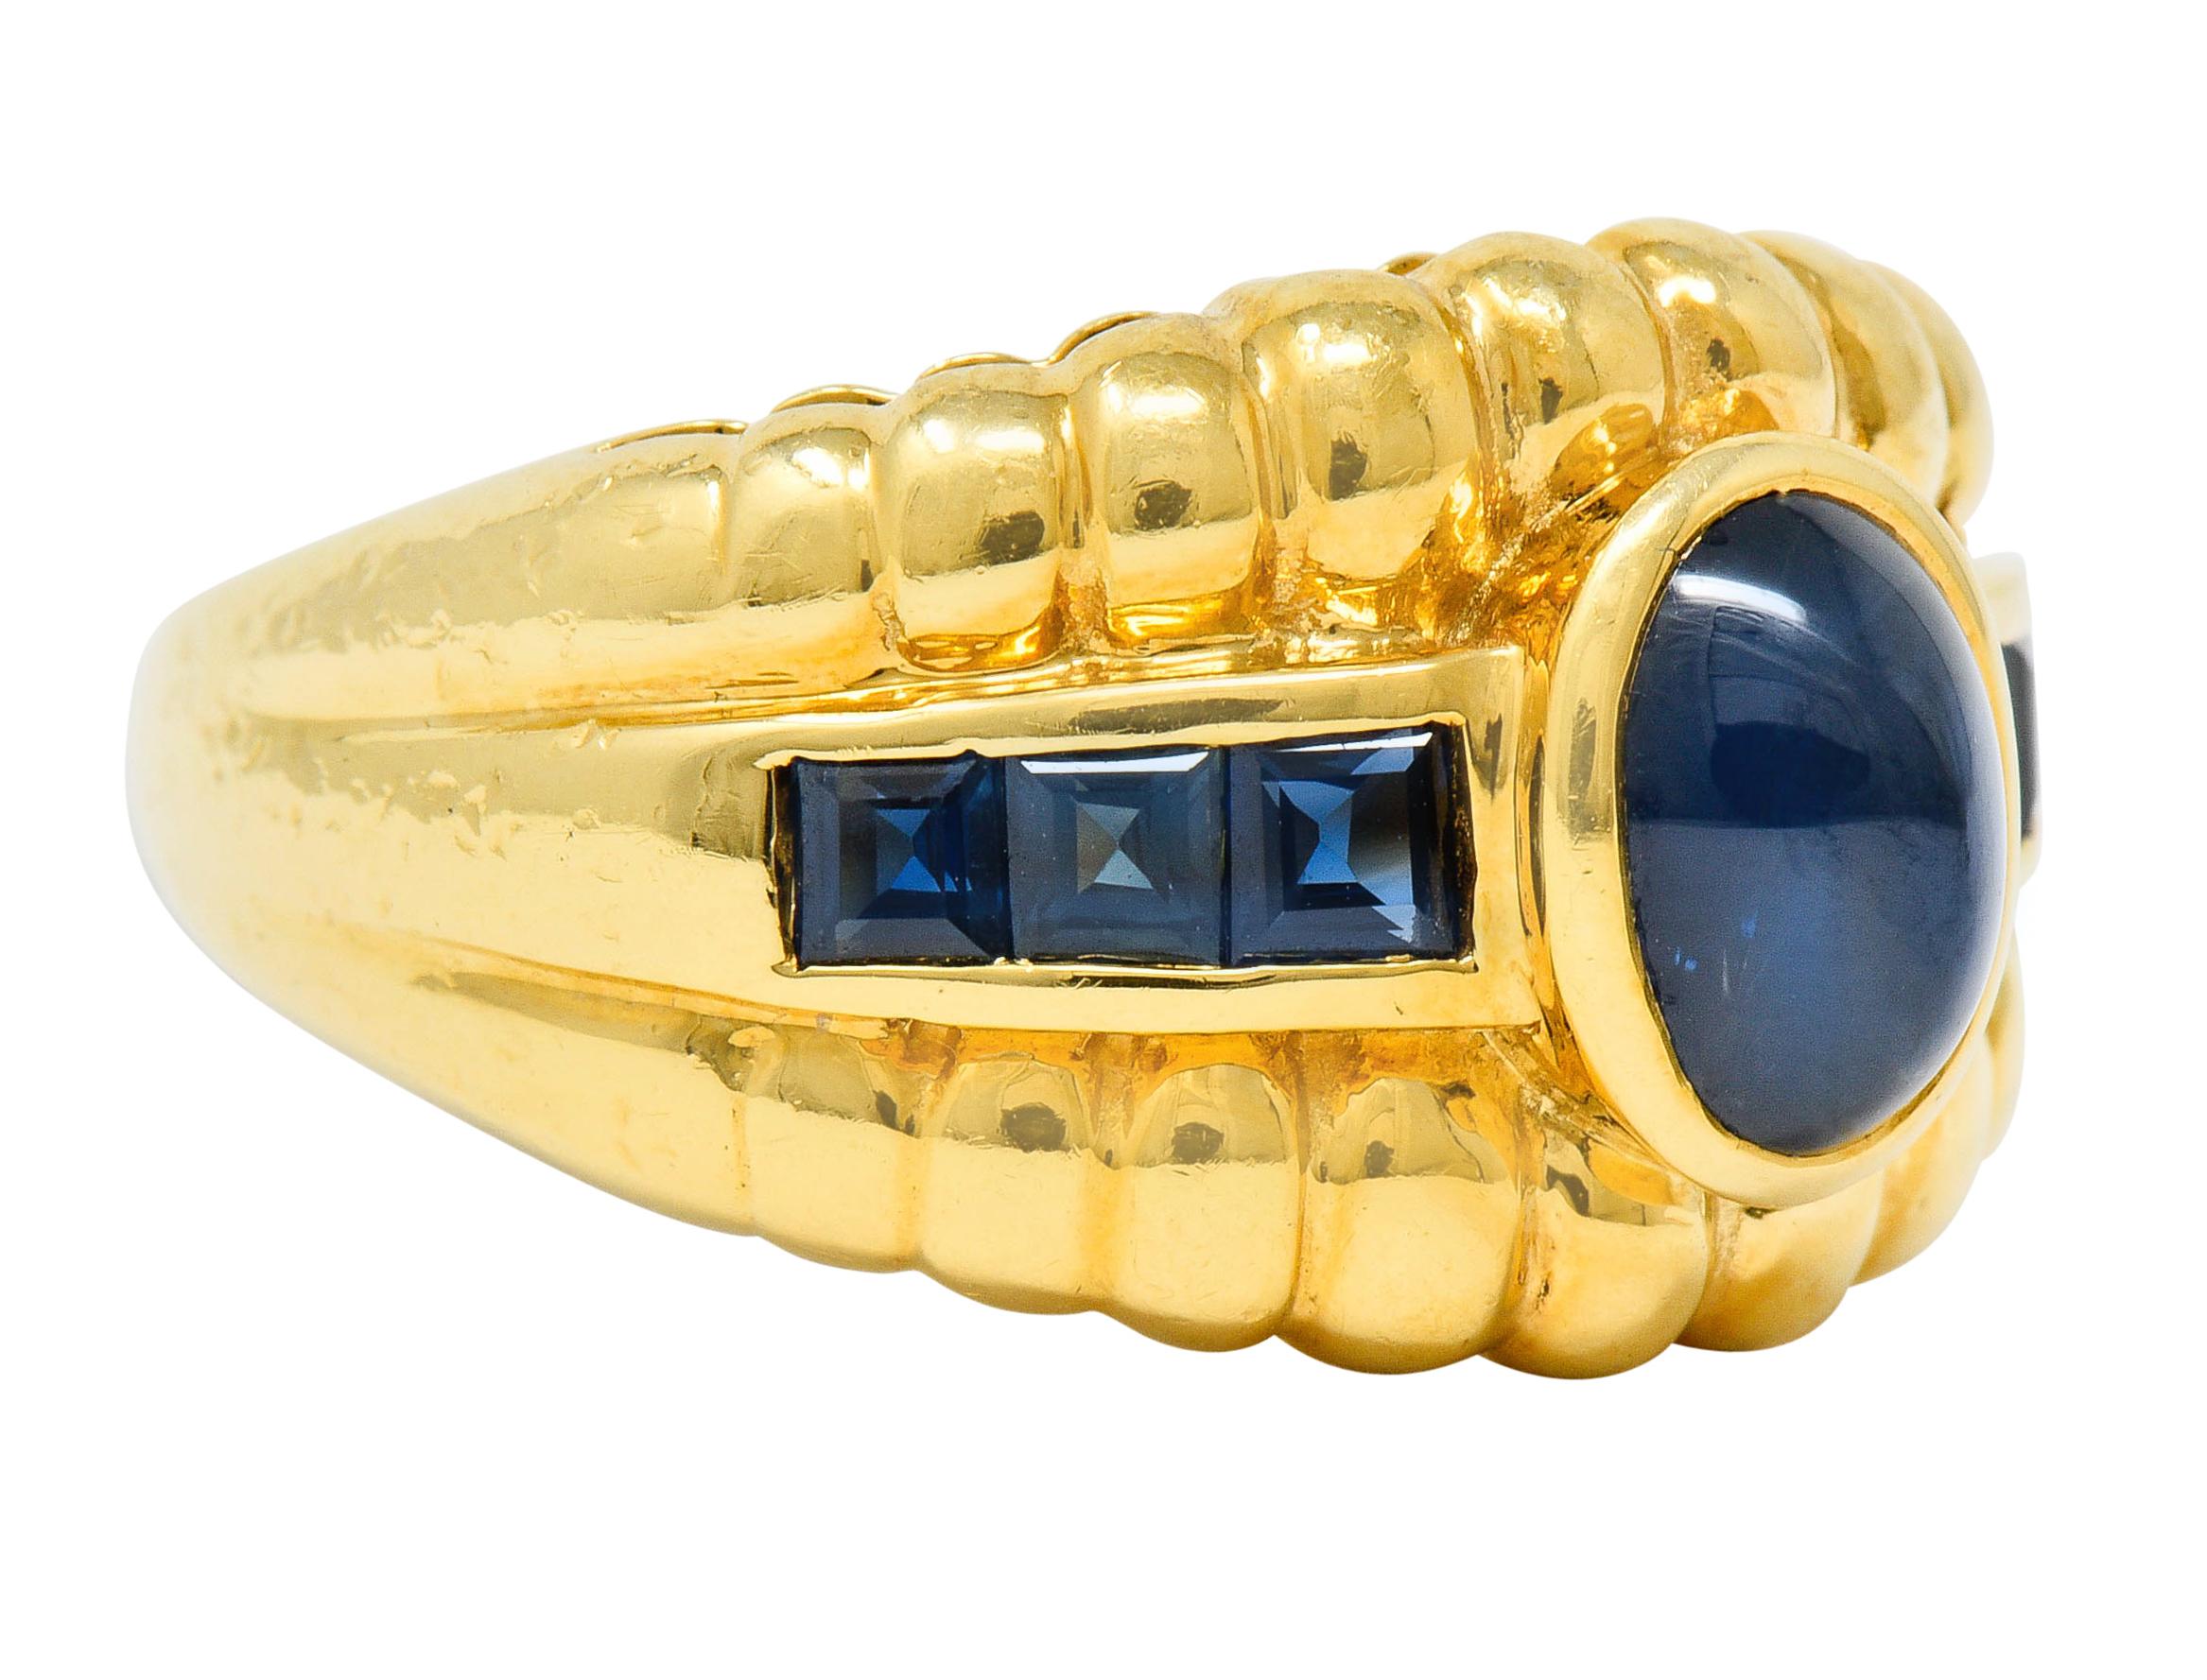 Wide band ring is brightly polished with deeply ridged edges

And centers a bezel set oval sapphire cabochon weighing approximately 1.50 carats

Translucent and medium-dark blue with subtle chatoyancy

Flanked by channel set and square cut sapphire